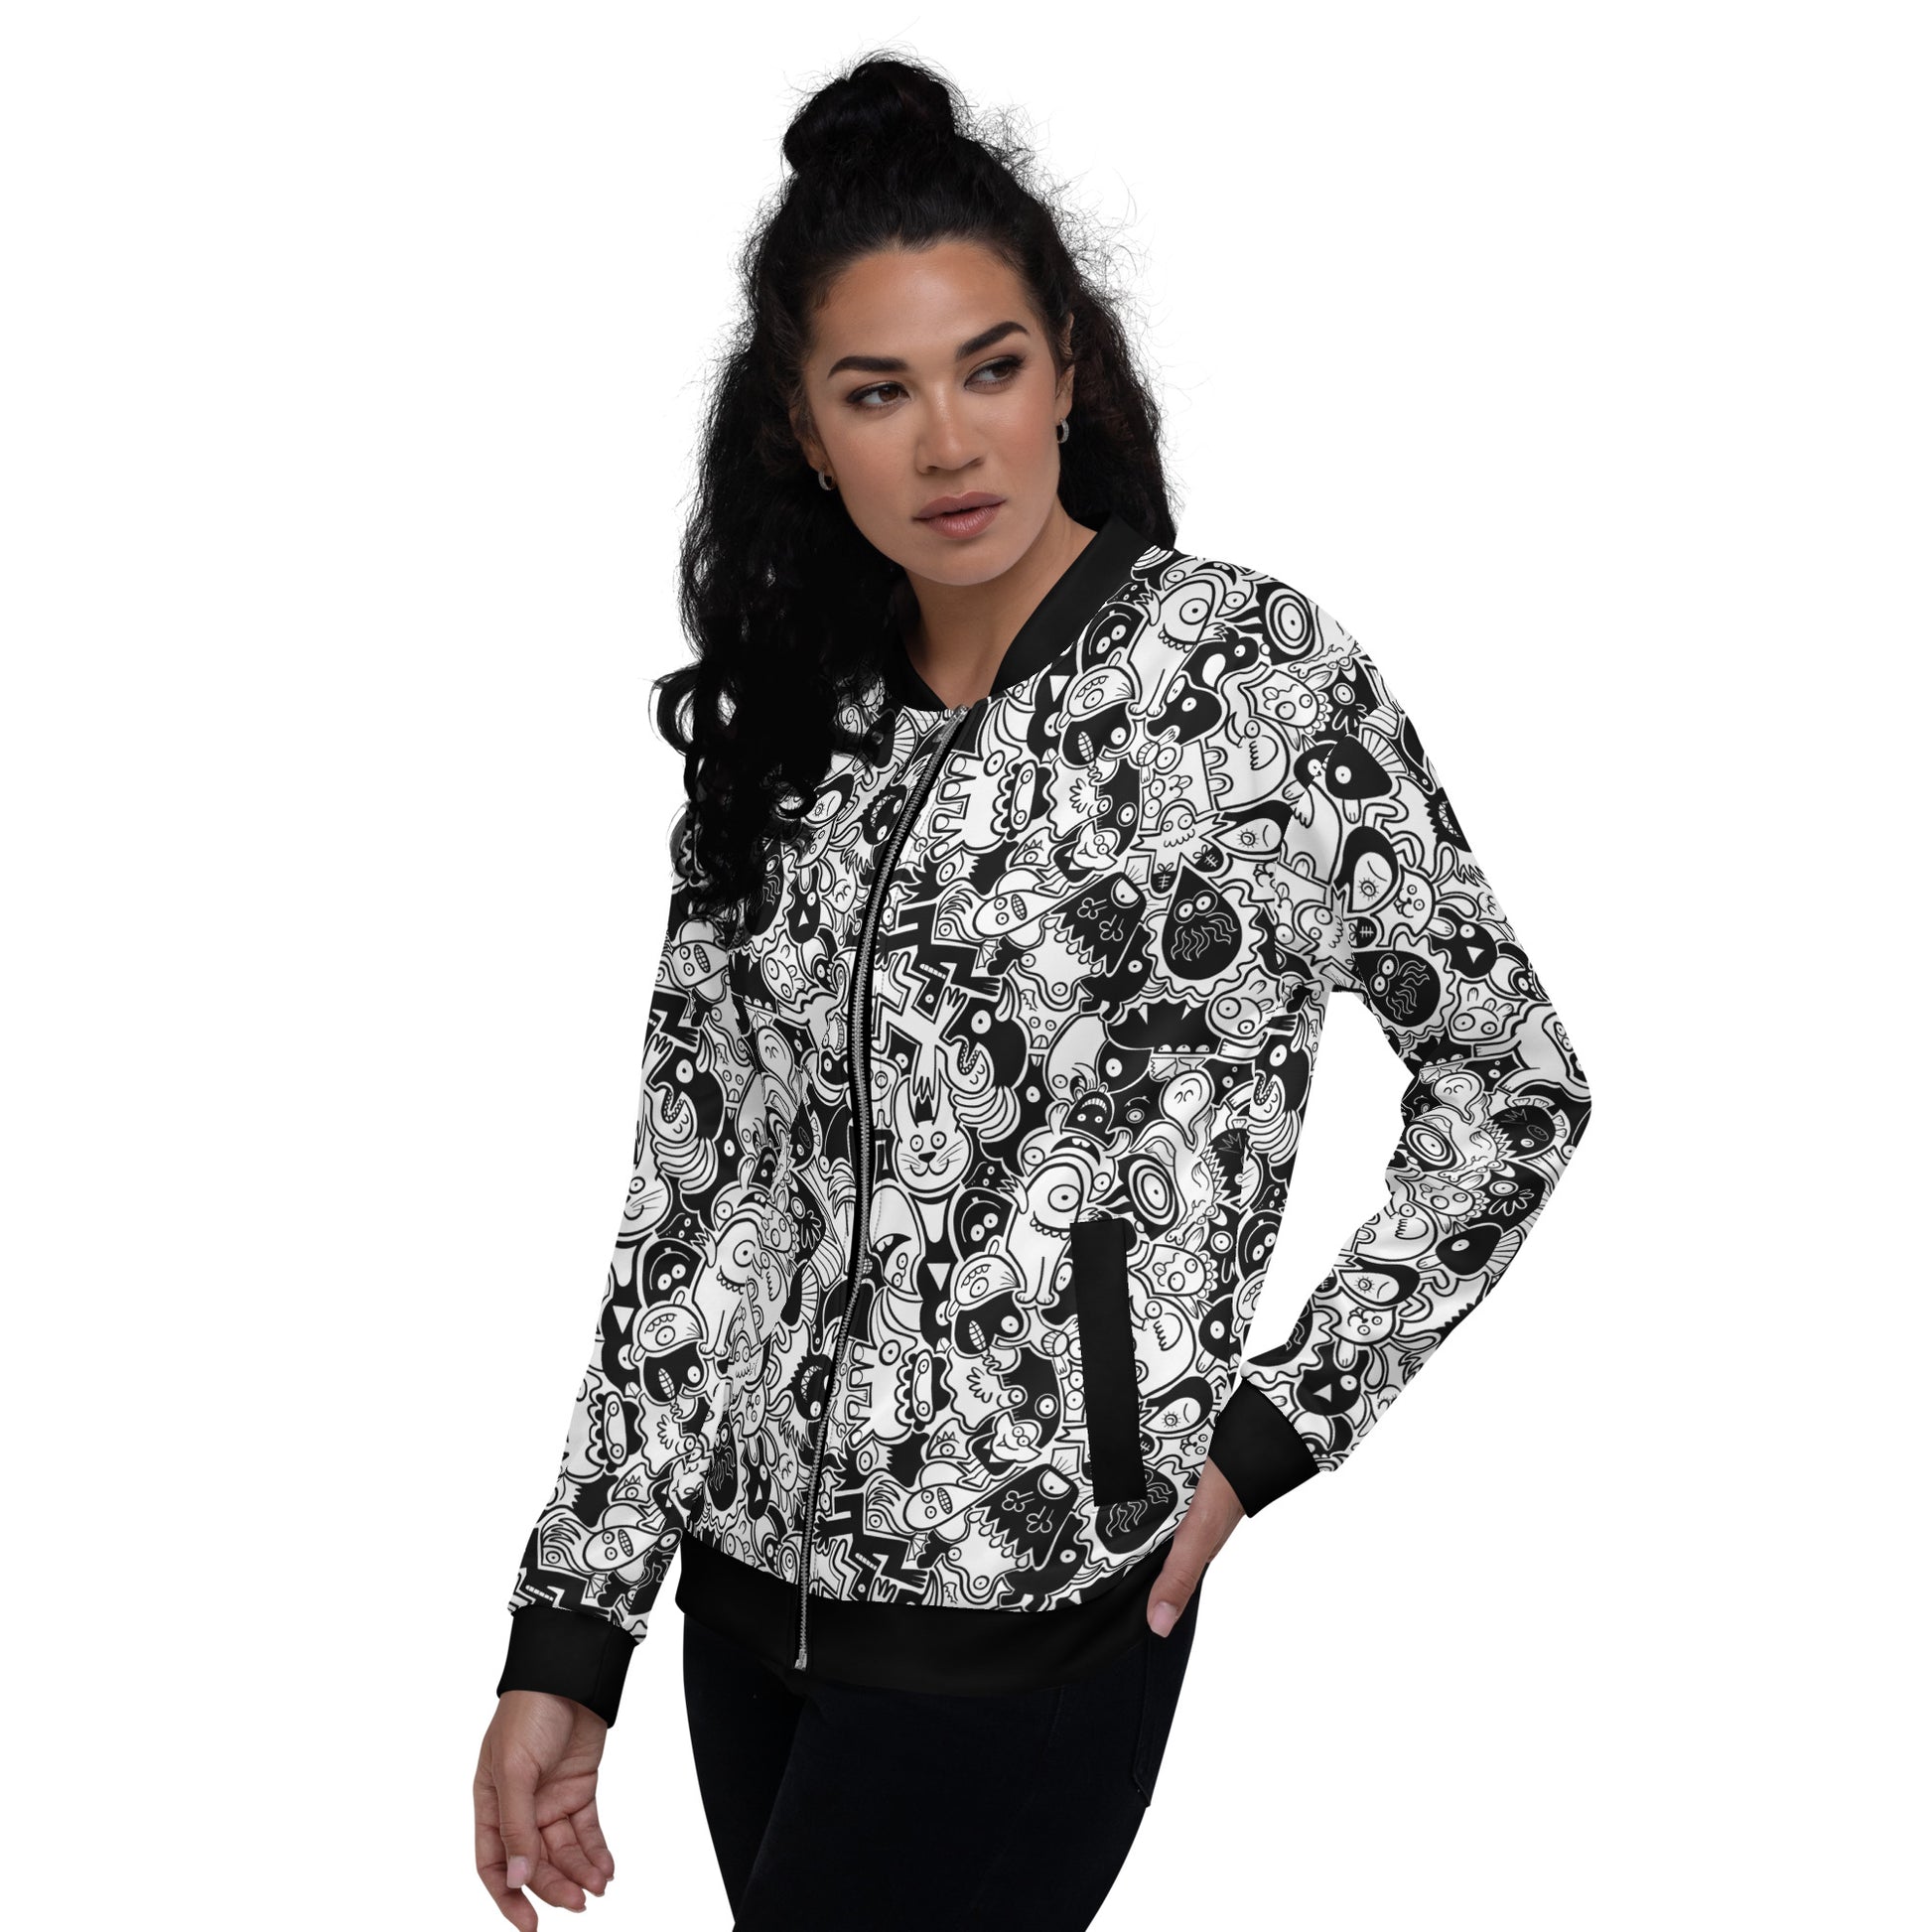 Nice woman wearing a Unisex Bomber Jacket All-over printed with Joyful crowd of black and white doodle creatures